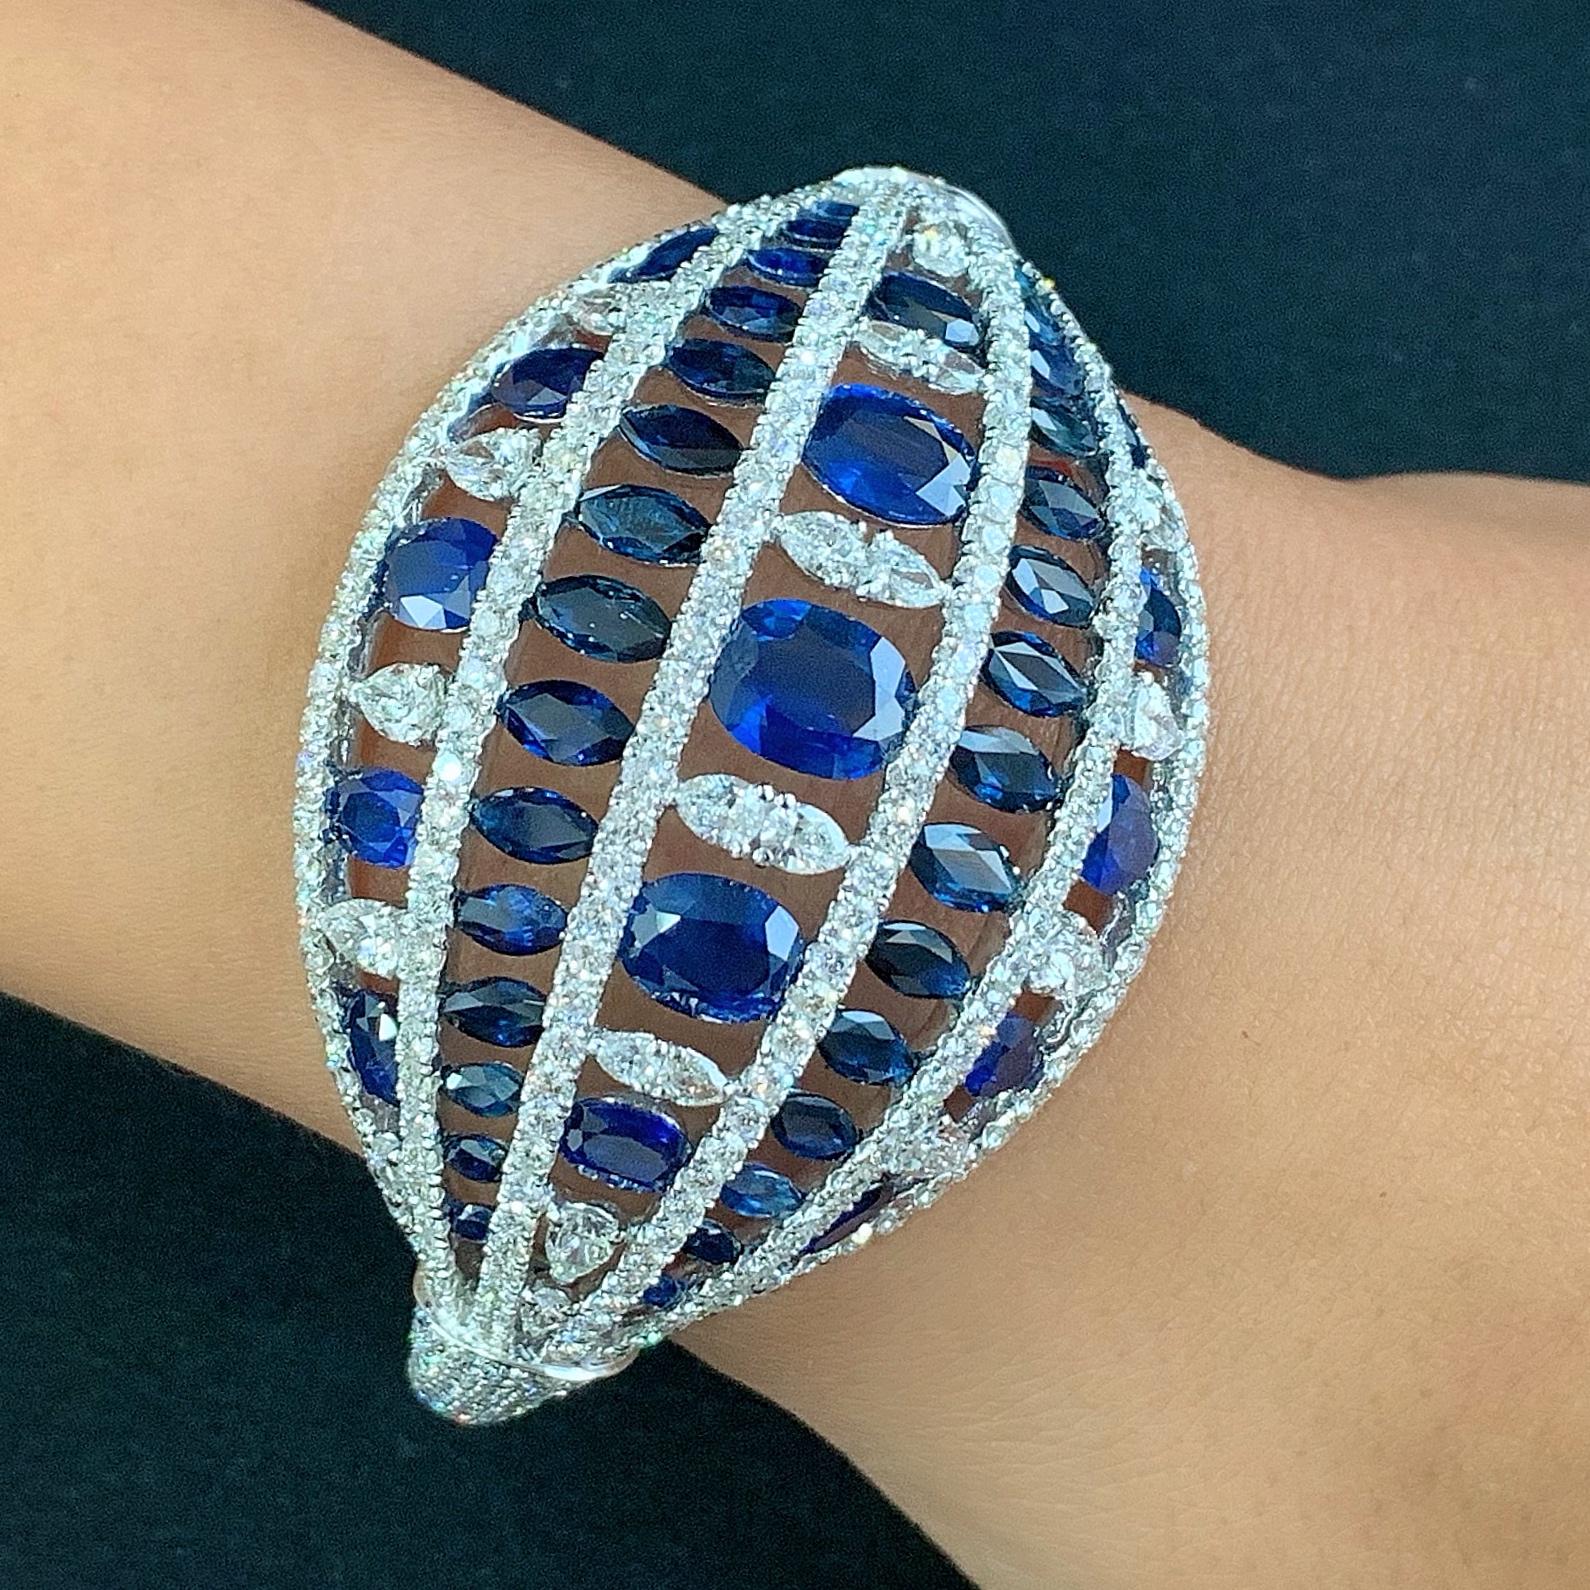 A breathtaking dome of royal blue oval and marquise sapphires (totaling 21.10 carats) is illuminated with over 350 dazzling pear-cut and brilliant-cut diamonds (totaling 10.95 carats).  Handcrafted in 18K white gold, this cuff bangle is the perfect